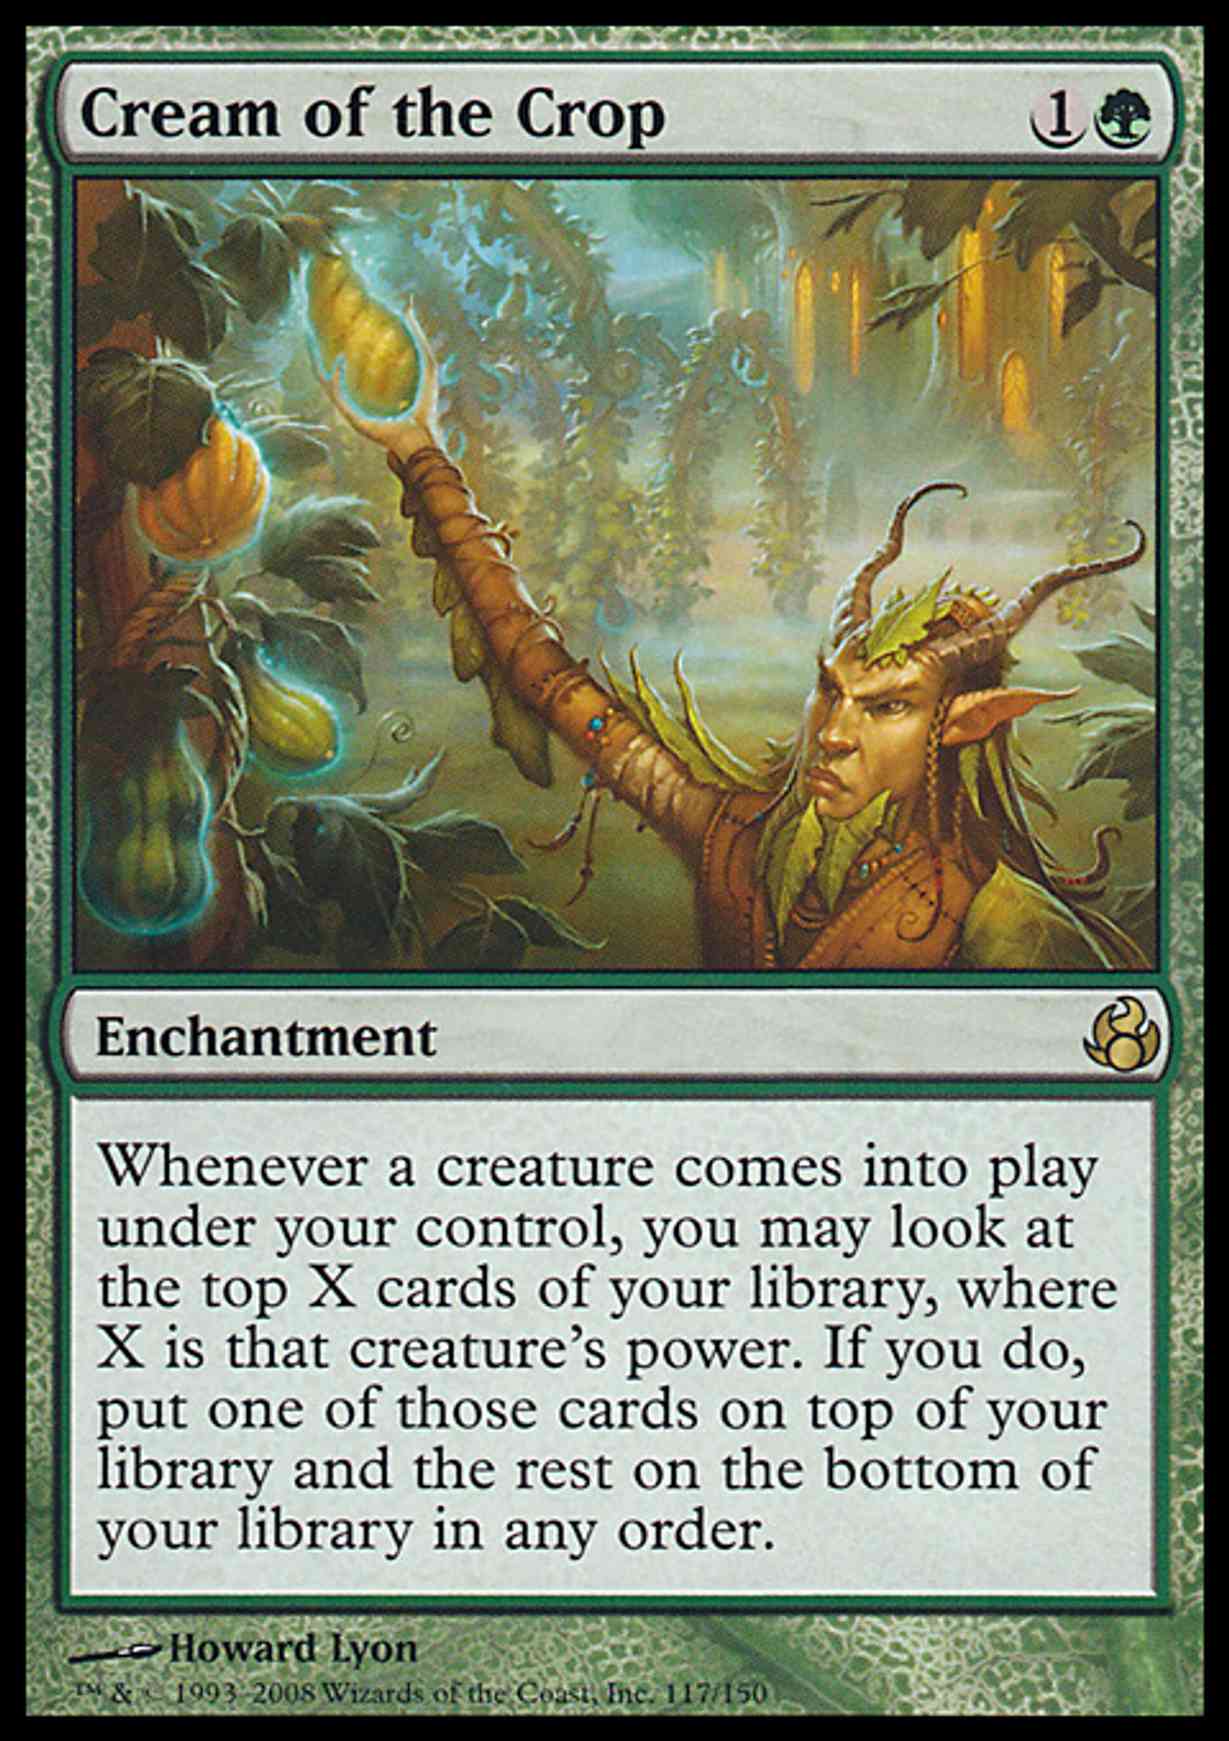 Cream of the Crop magic card front